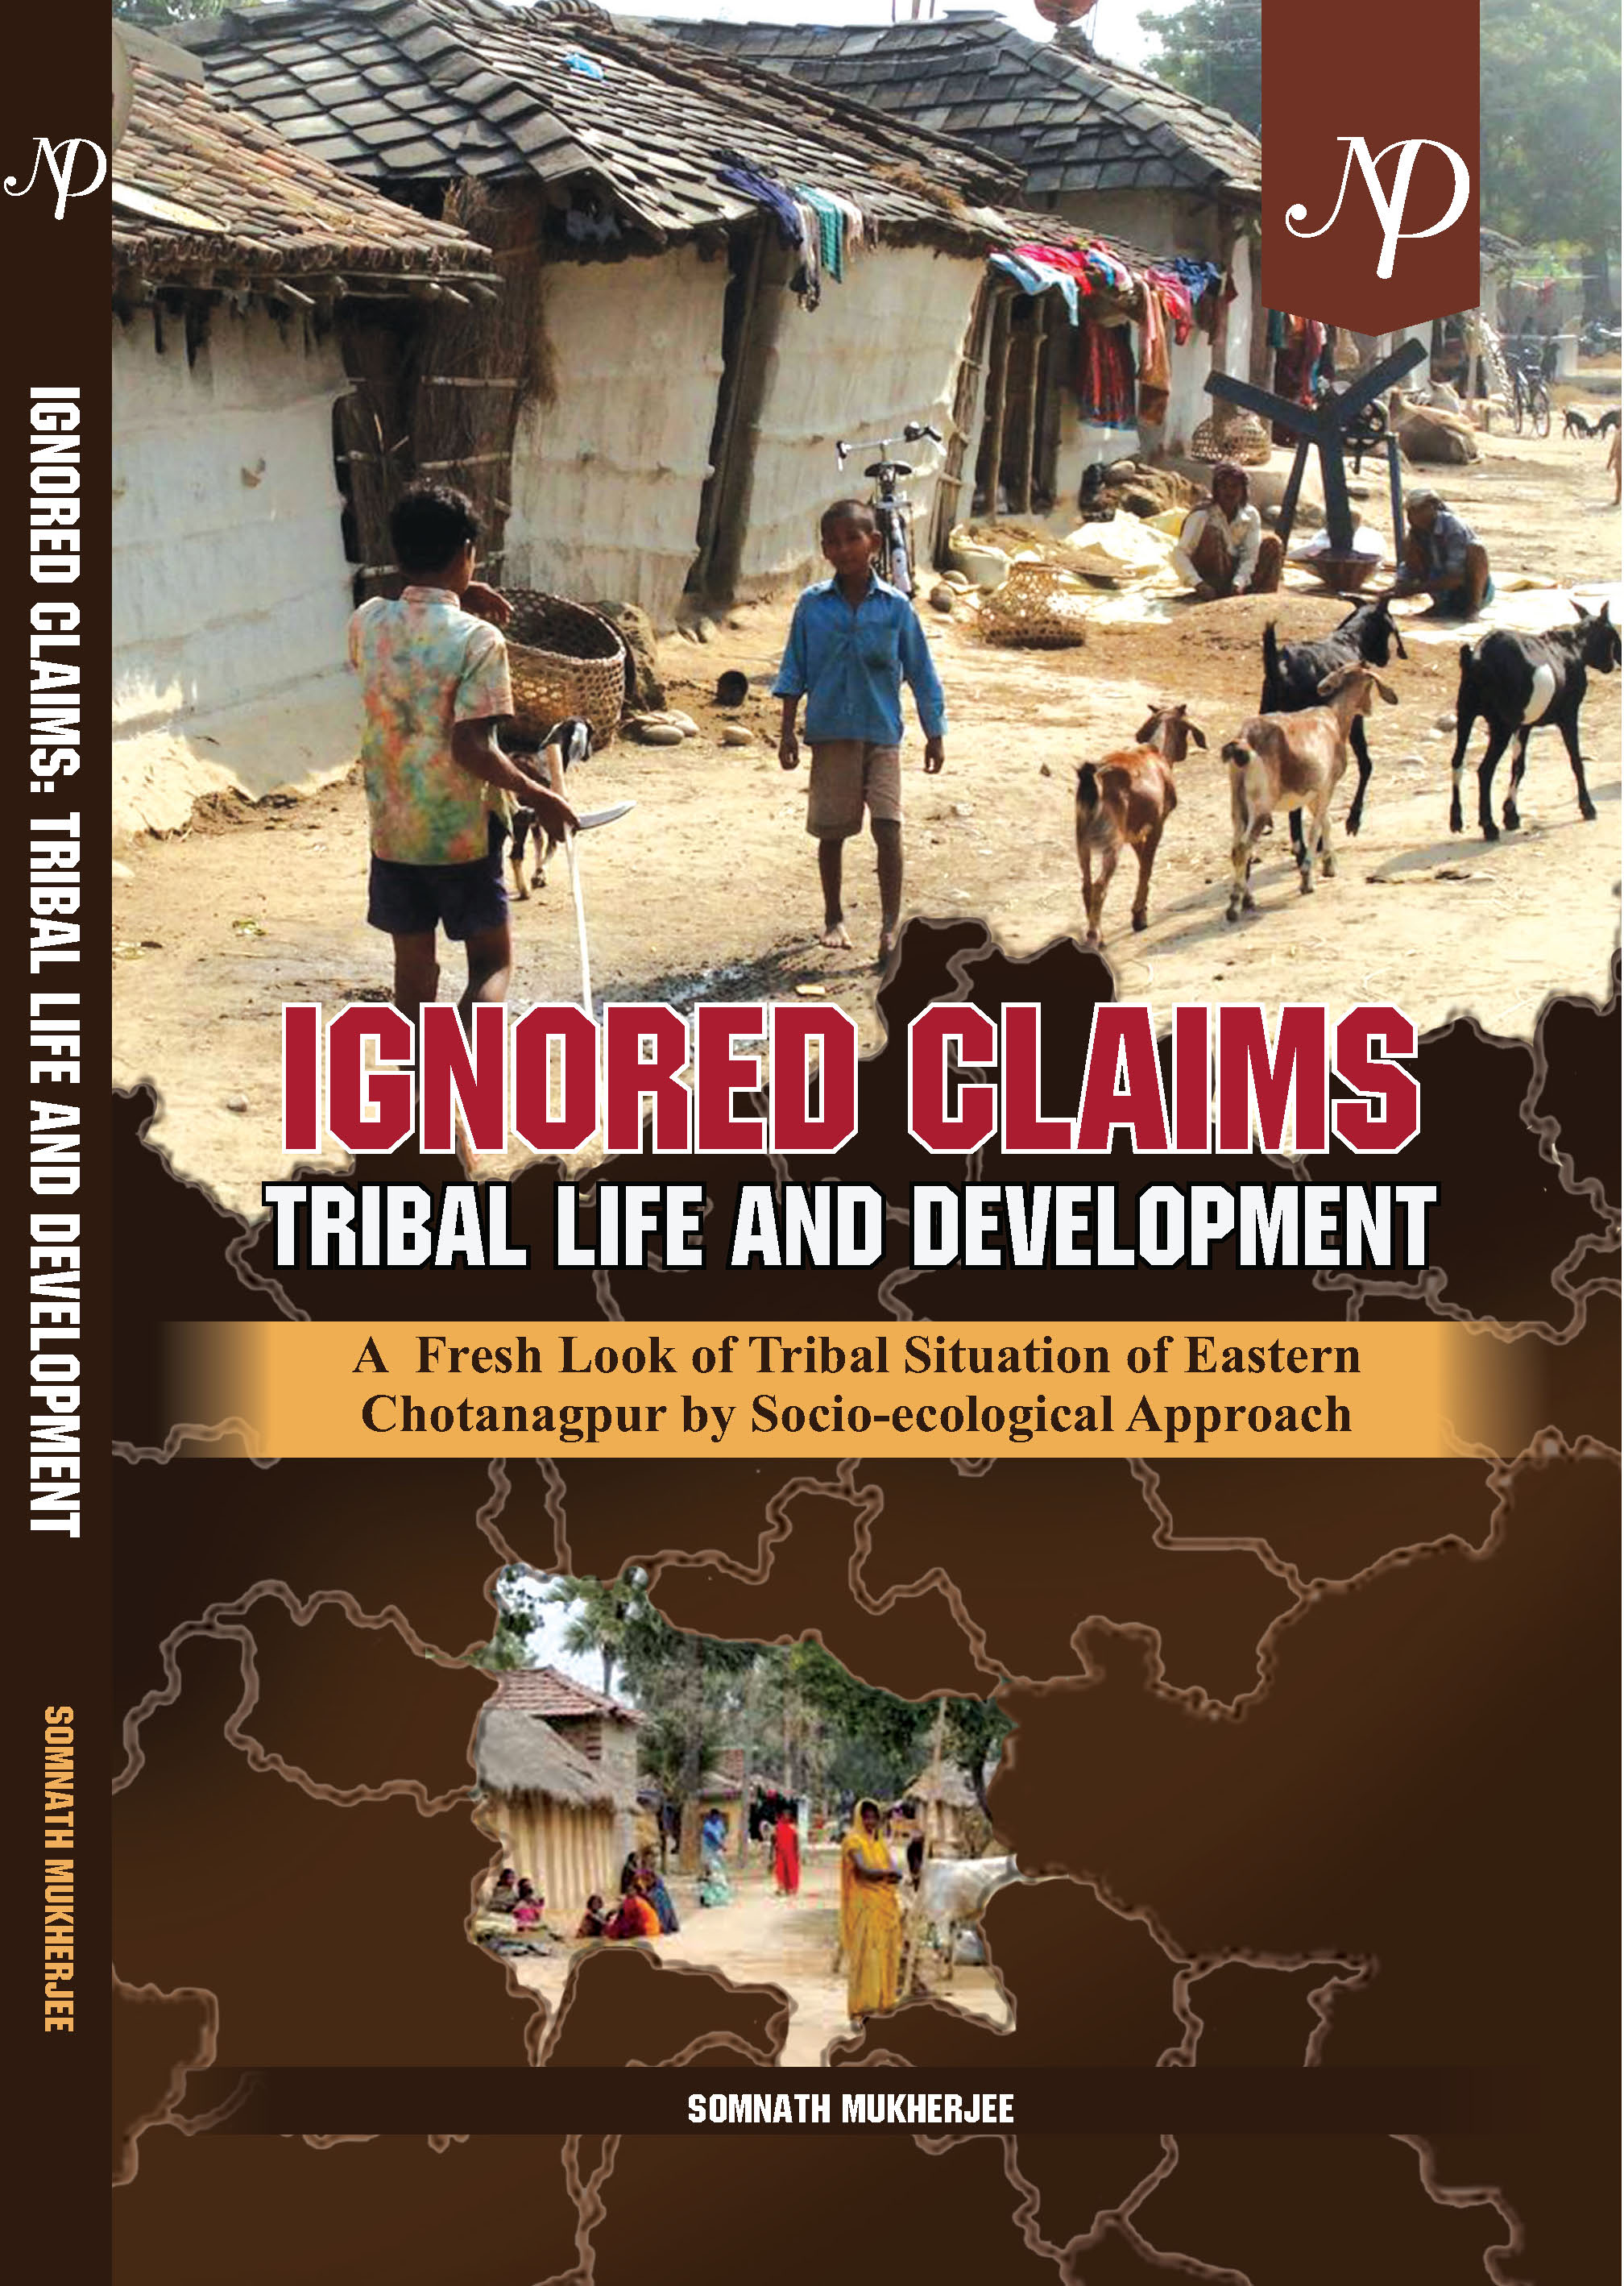 Ignored Claims Tribal Life and Development: A Fresh Look of Tribal Situation of Eastern Chotanagpur by Socio-ecological Approach